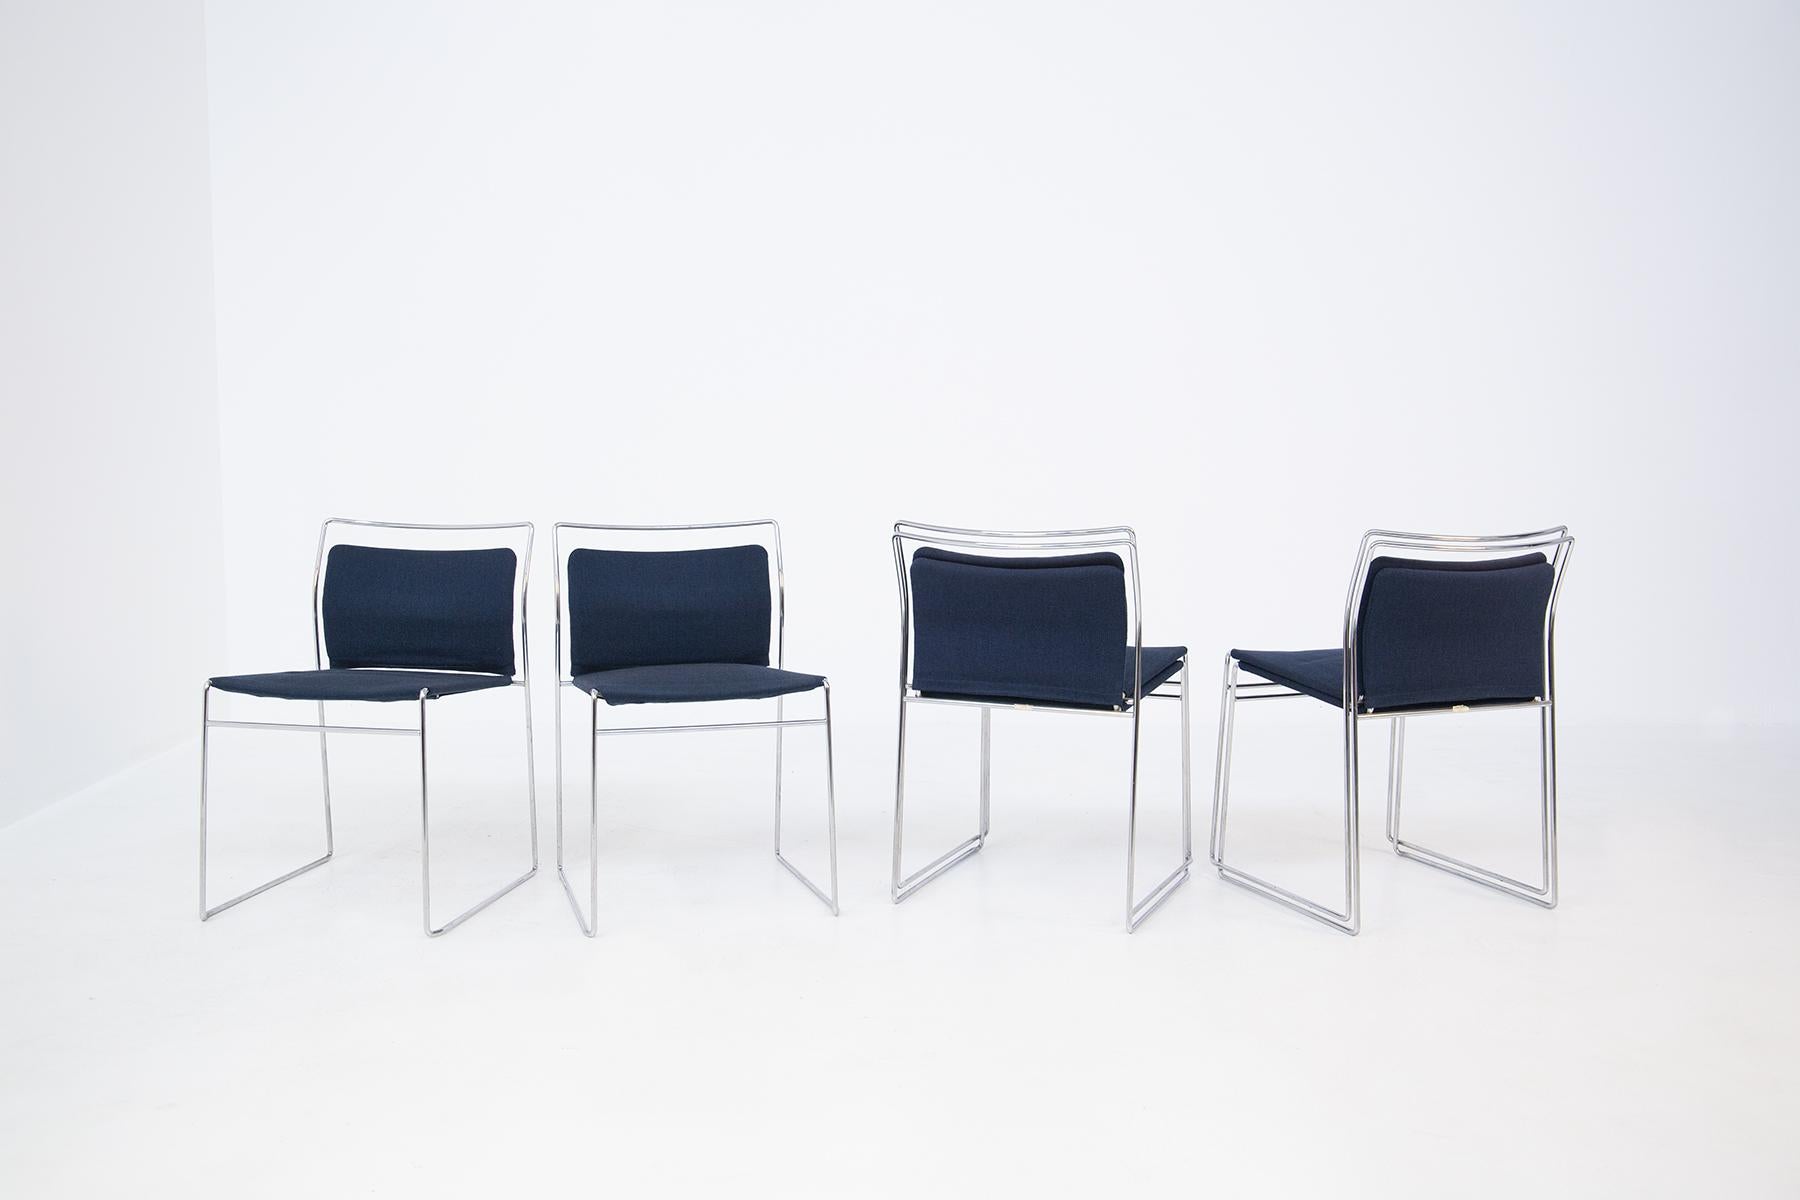 Beautiful set consisting of six chairs designed by the great designer Kazuhide Takahama for Gavina manufactory in the 1970s.
The wonderful chairs by Kazuhide Takahama were made with tubular steel for the frame, while fine cotton fabric in ocean